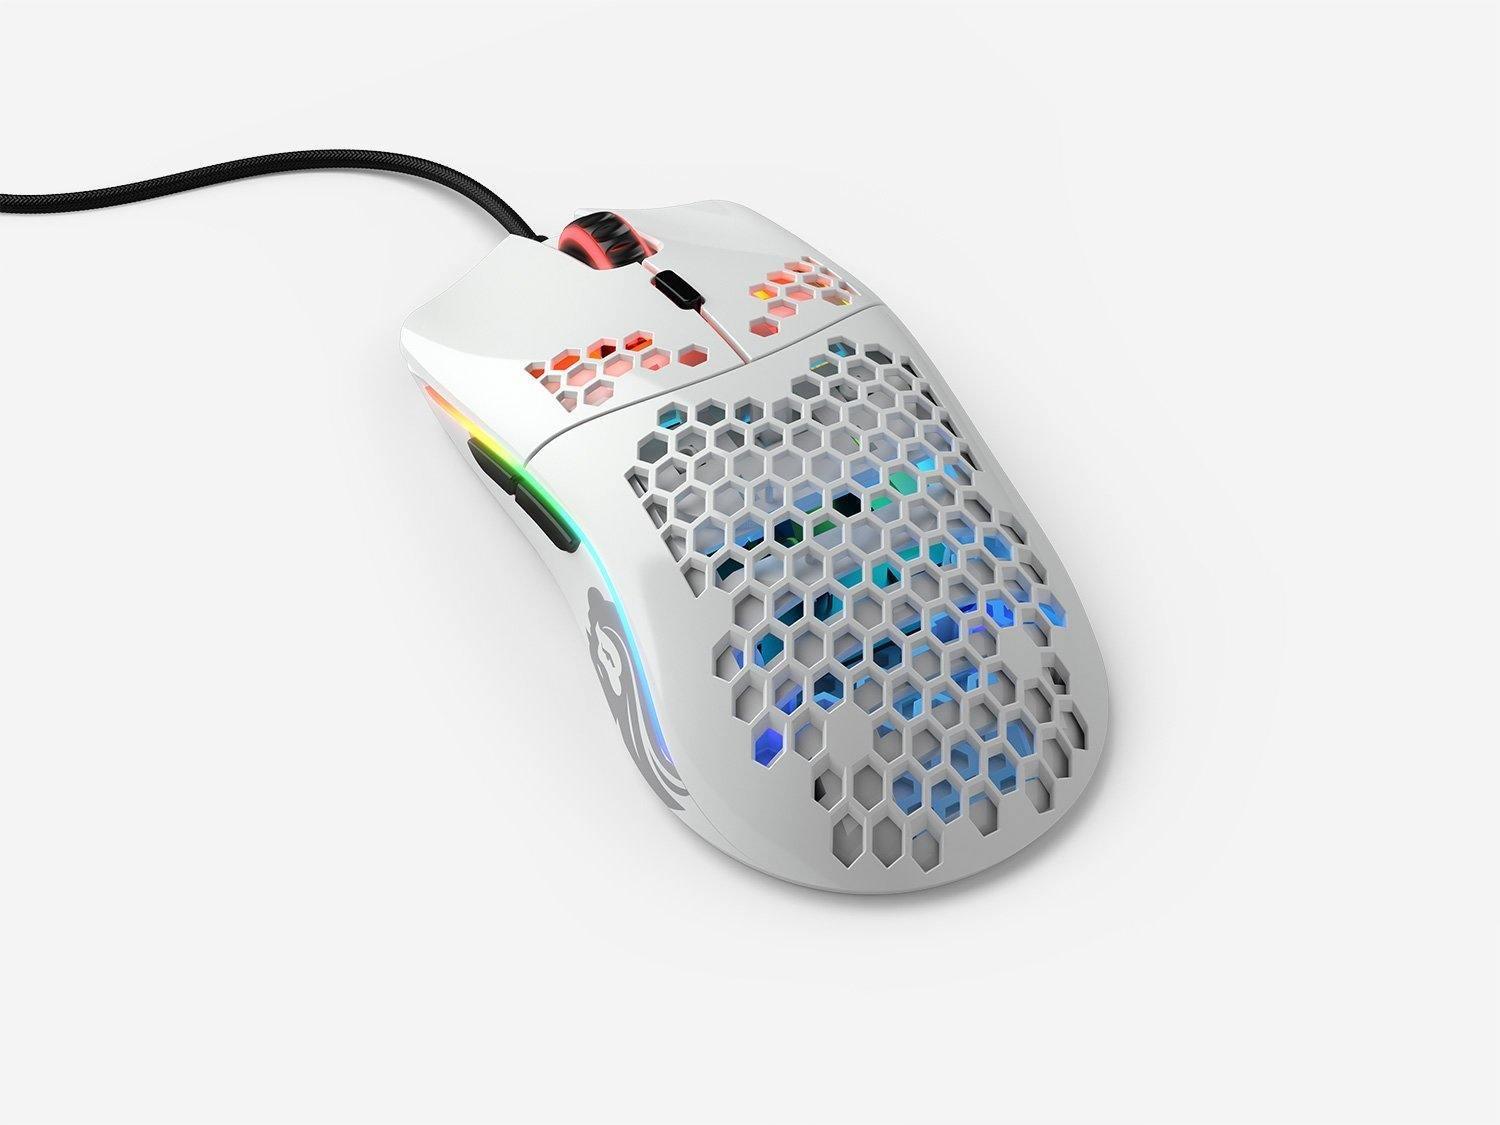 Glorious Gaming Mouse Model O Minus - Glossy White